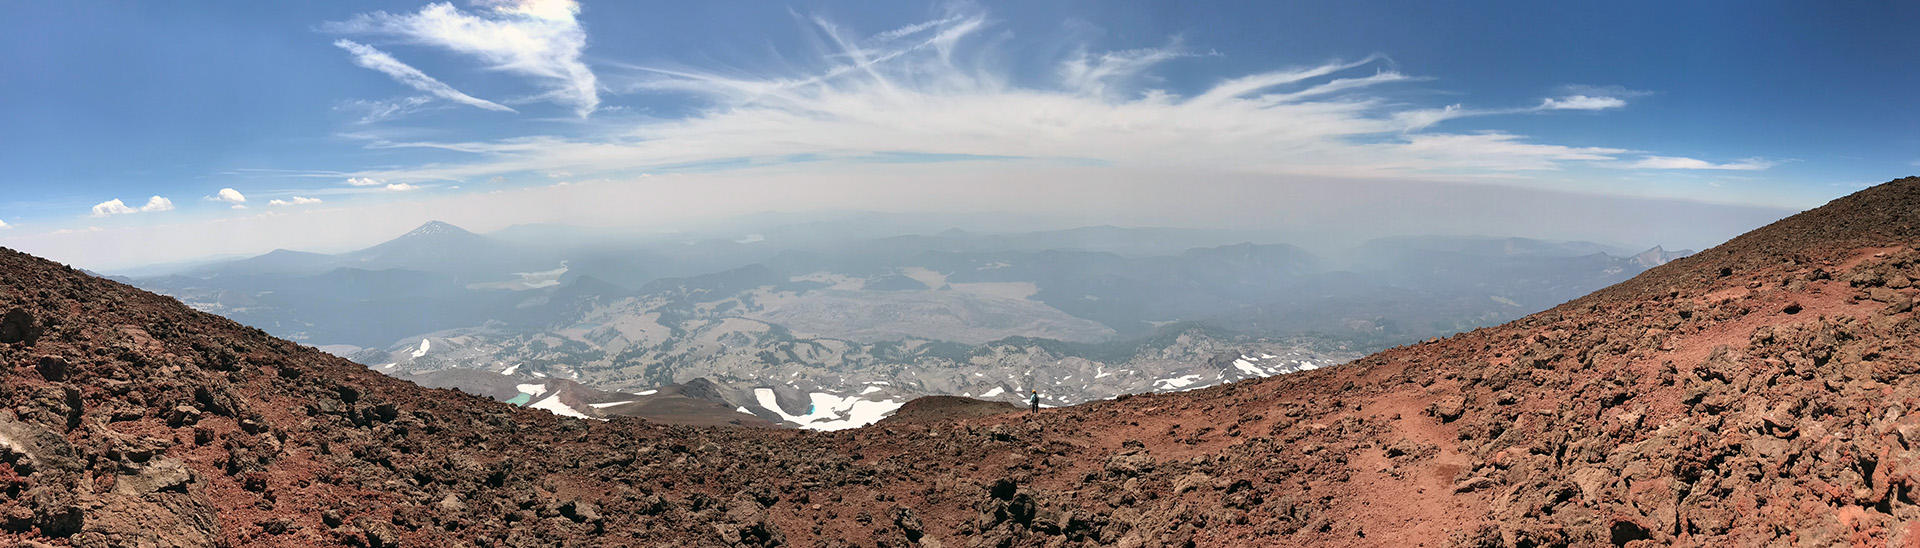 Nearing the summit, South Climb Route - July 2018